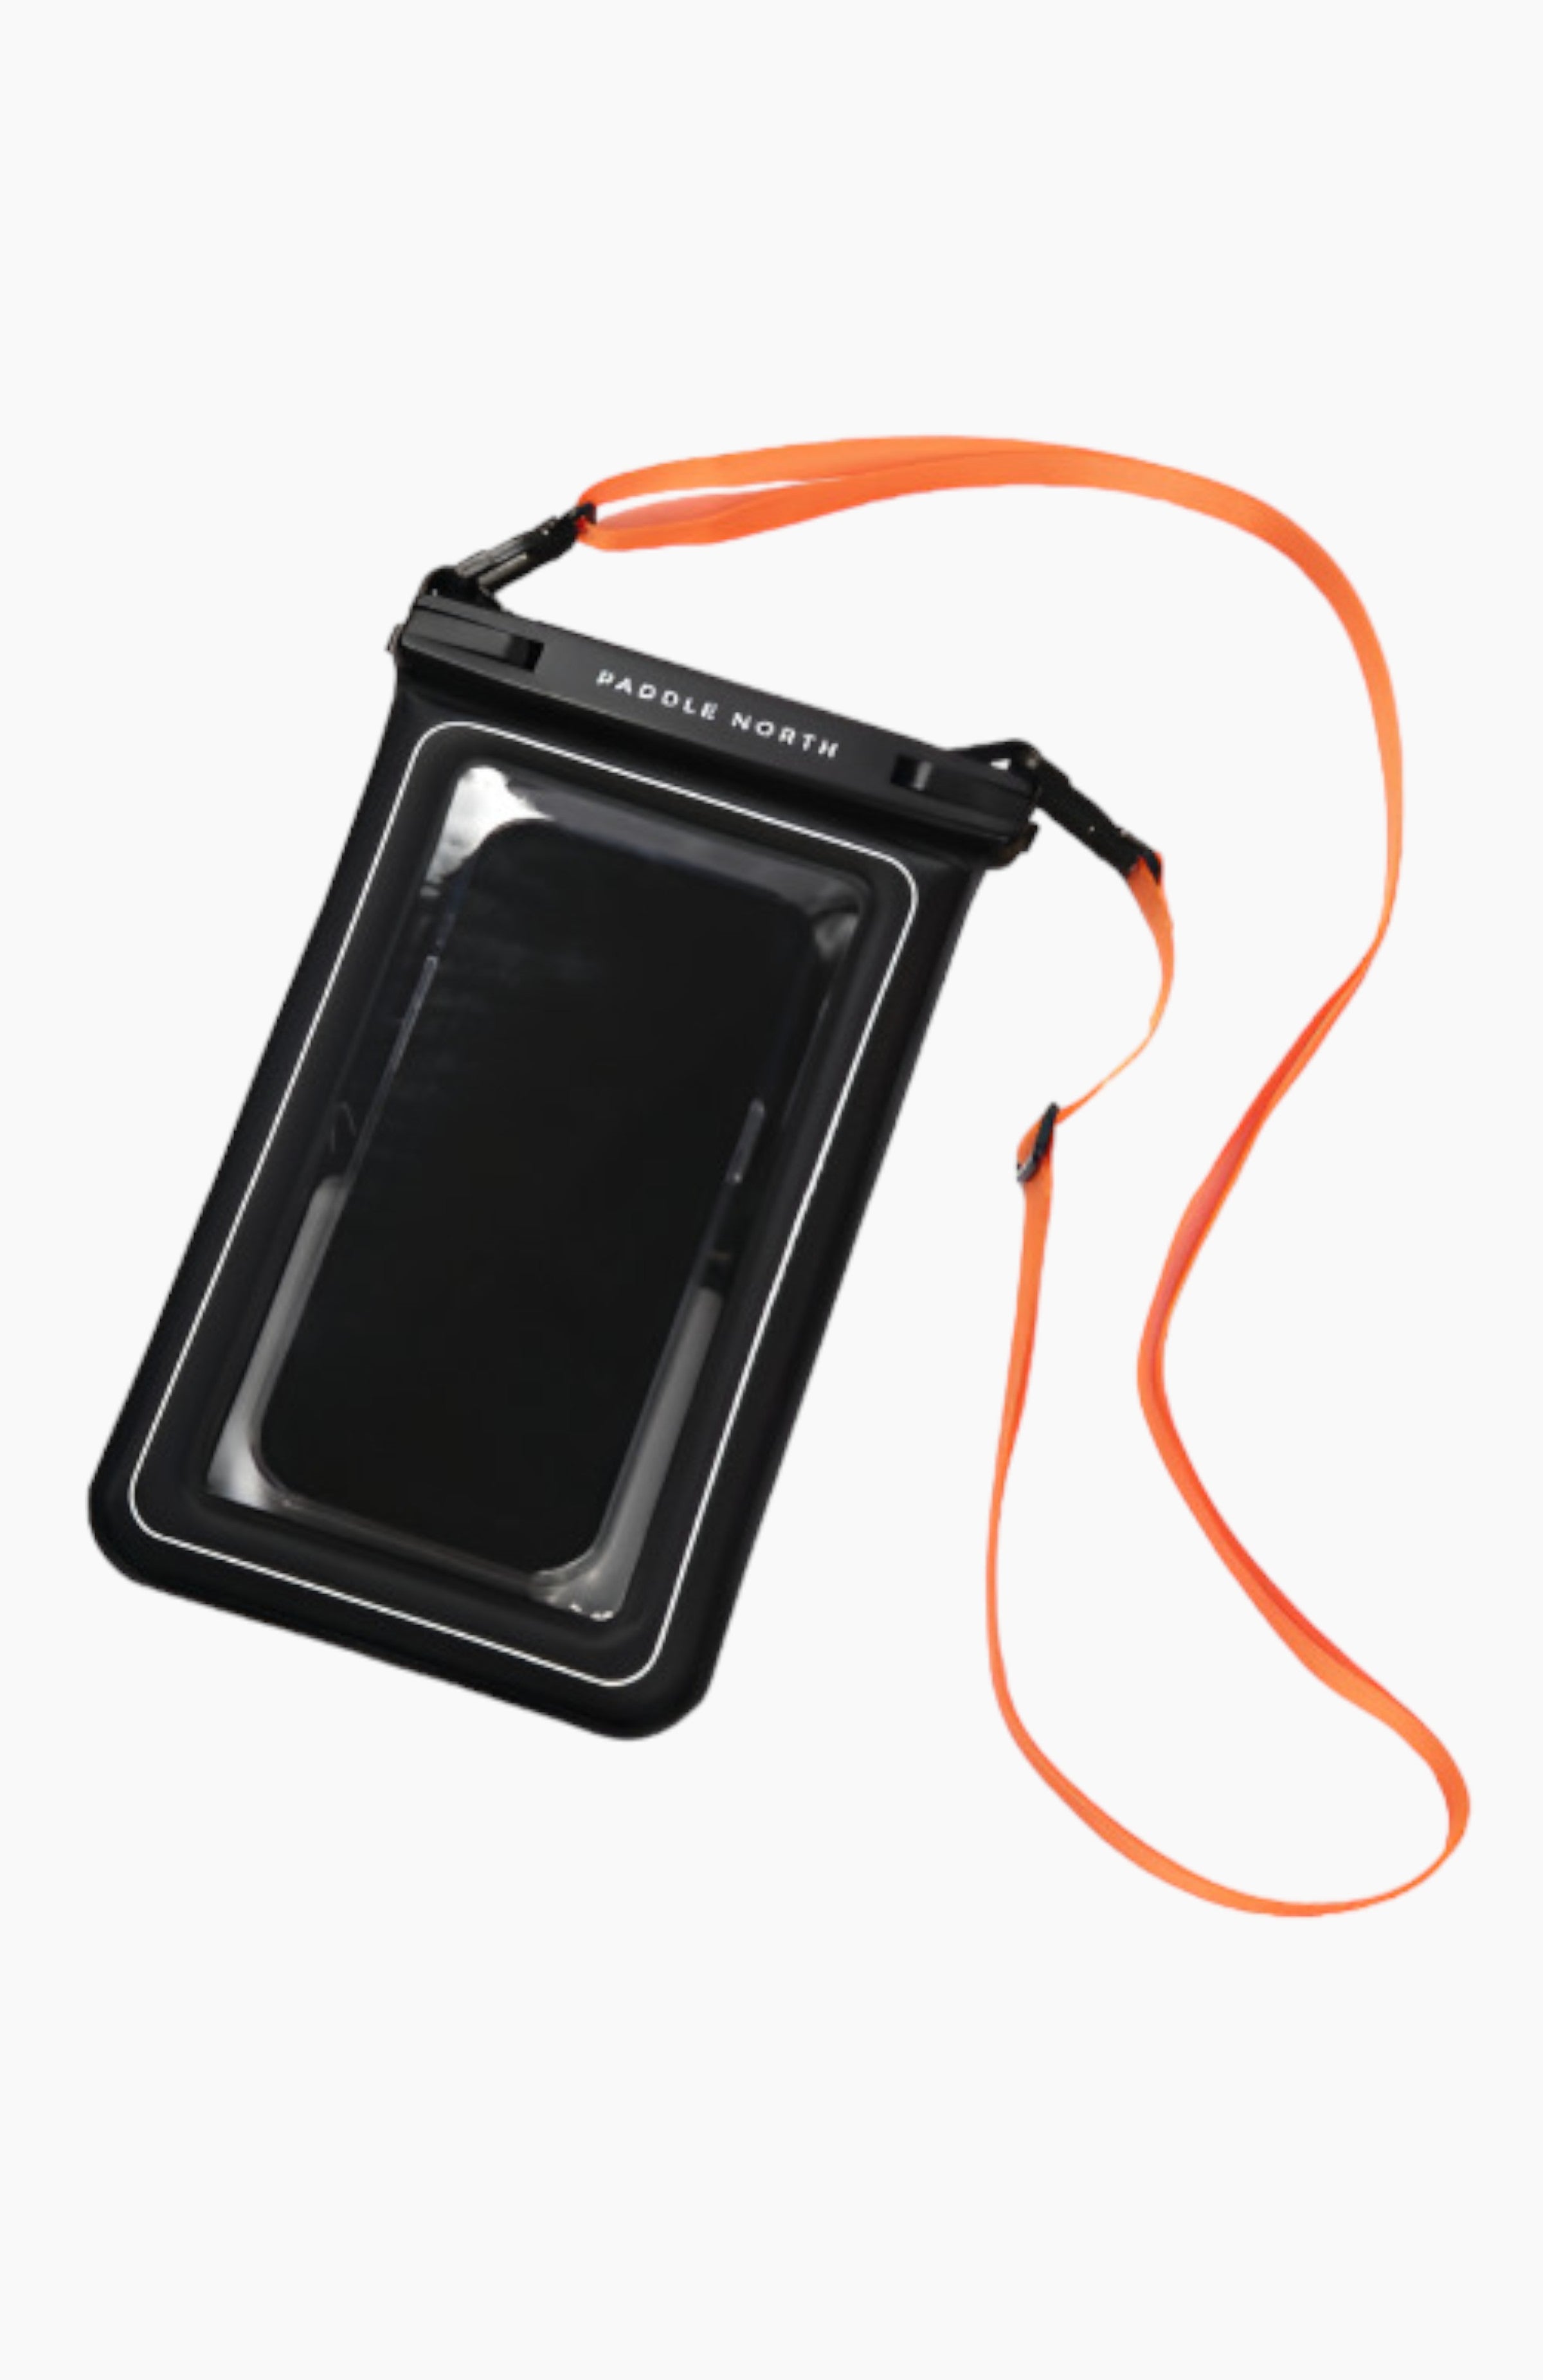 Waterproof protective transparent pouch with orange strap.